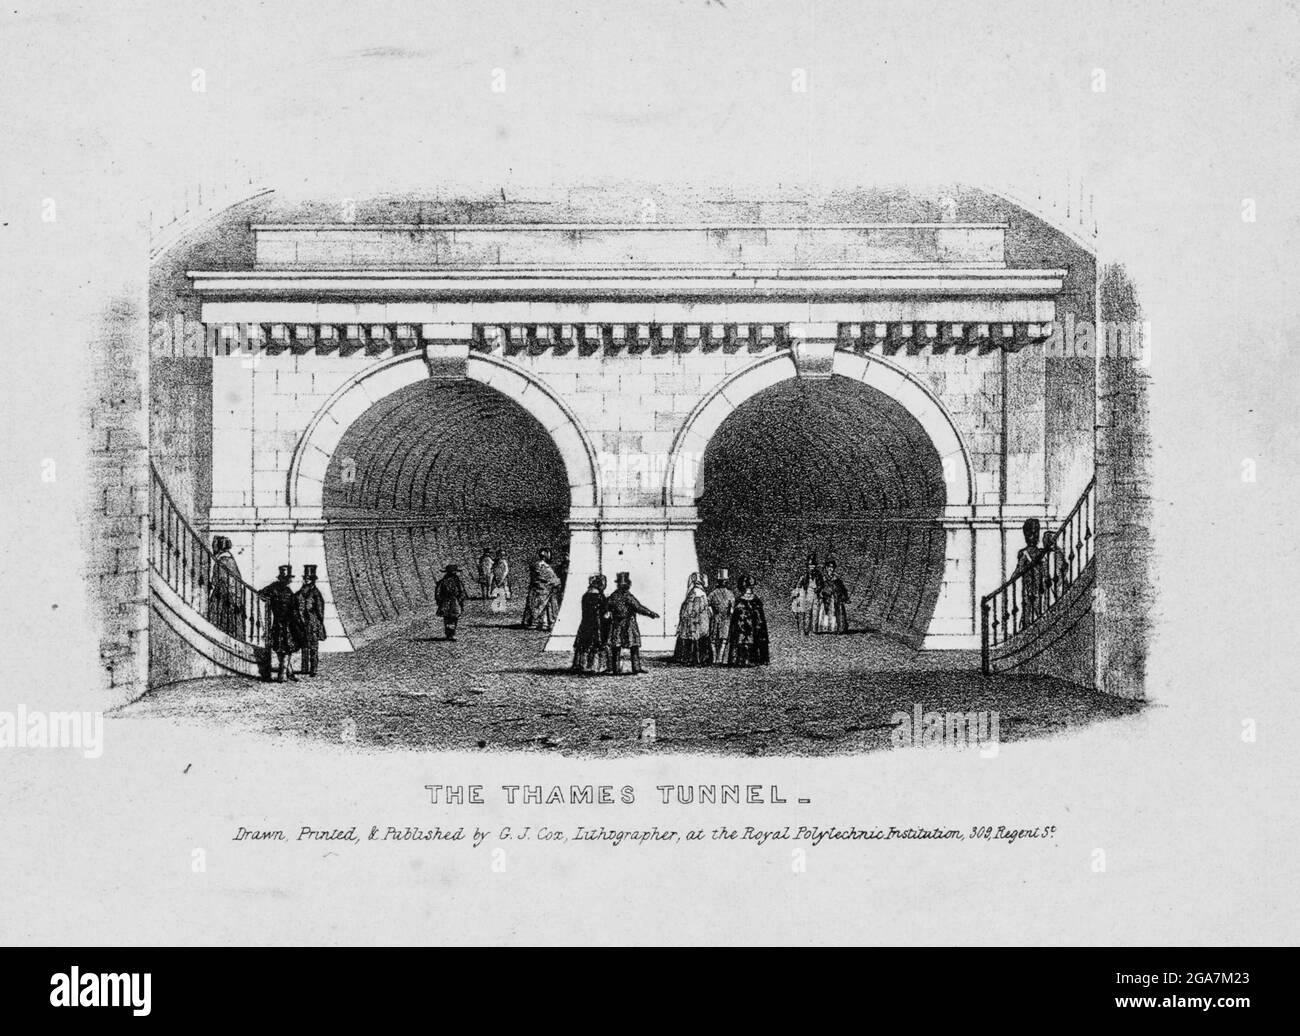 The Thames Tunnel is a tunnel beneath the River Thames in London, connecting Rotherhithe and Wapping. It measures 35 feet (11 m) wide by 20 feet (6 m) high and is 1,300 feet (396 m) long, running at a depth of 75 feet (23 m) below the river surface measured at high tide. It is the first tunnel known to have been constructed successfully underneath a navigable river and was built between 1825 and 1843 by Marc Brunel and his son Isambard using the tunnelling shield newly invented by the elder Brunel and Thomas Cochrane. The tunnel was originally designed for horse-drawn carriages, but was mainly Stock Photo